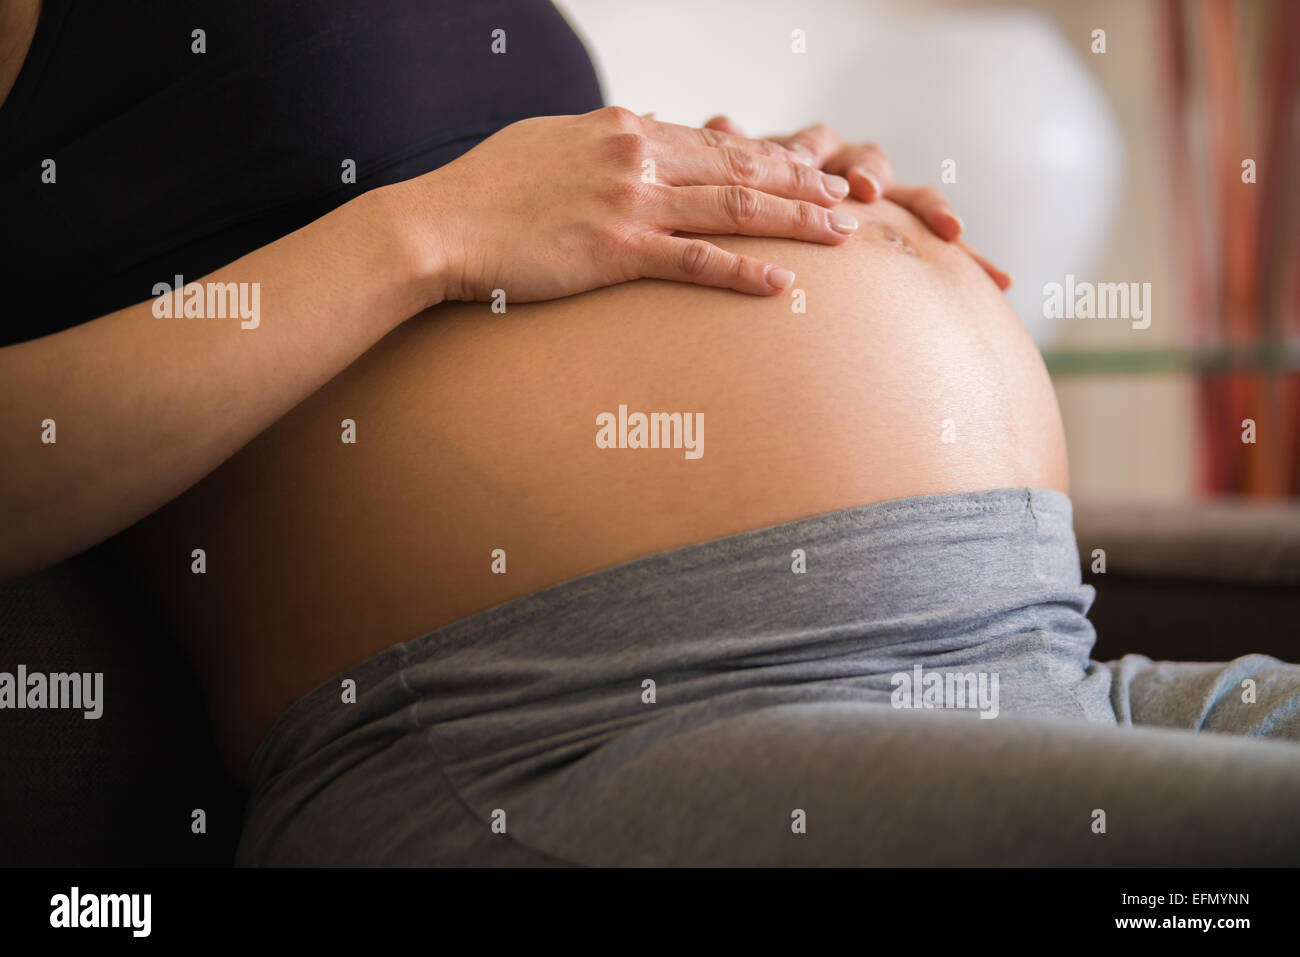 Baby bump, Image of an 8 month pregnant woman sitting on a couch, resting her hands on her baby bump belly. Stock Photo